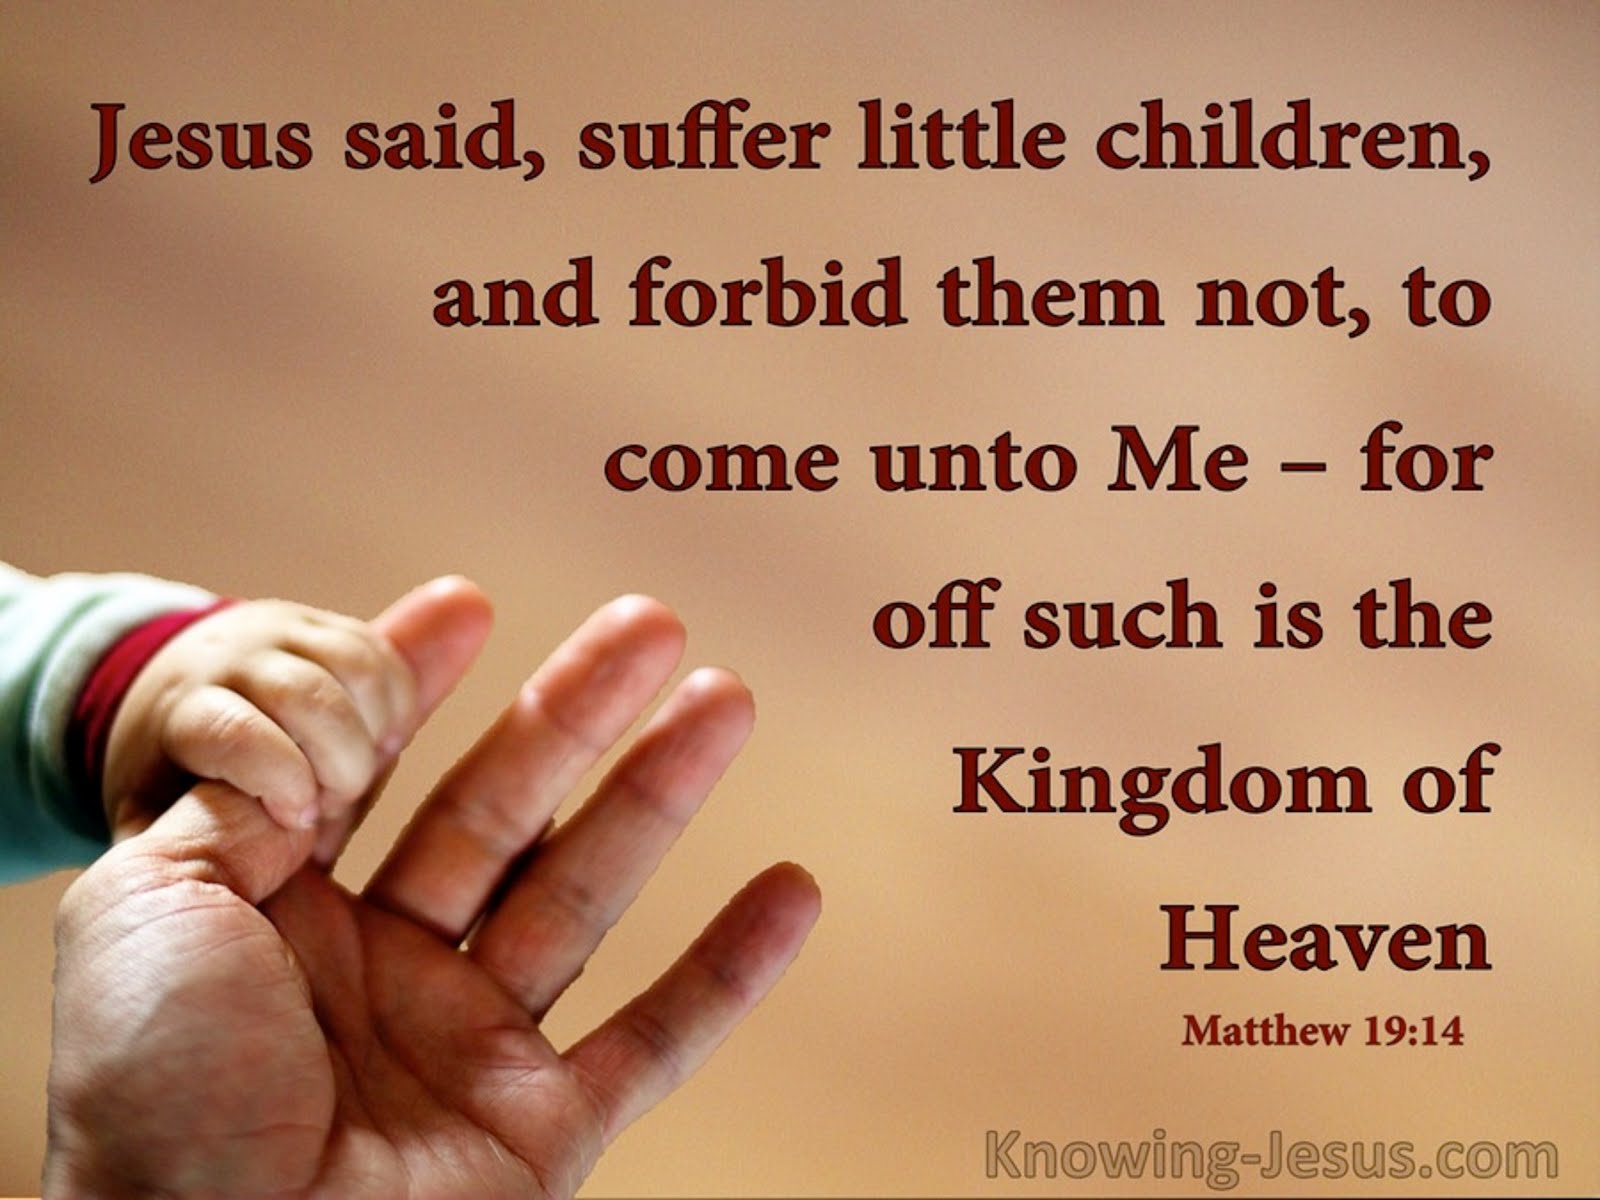 SUFFER NOT THE LITTLE CHILDREN FOR THEIRS IS THE KINGDOM OF HEAVEN